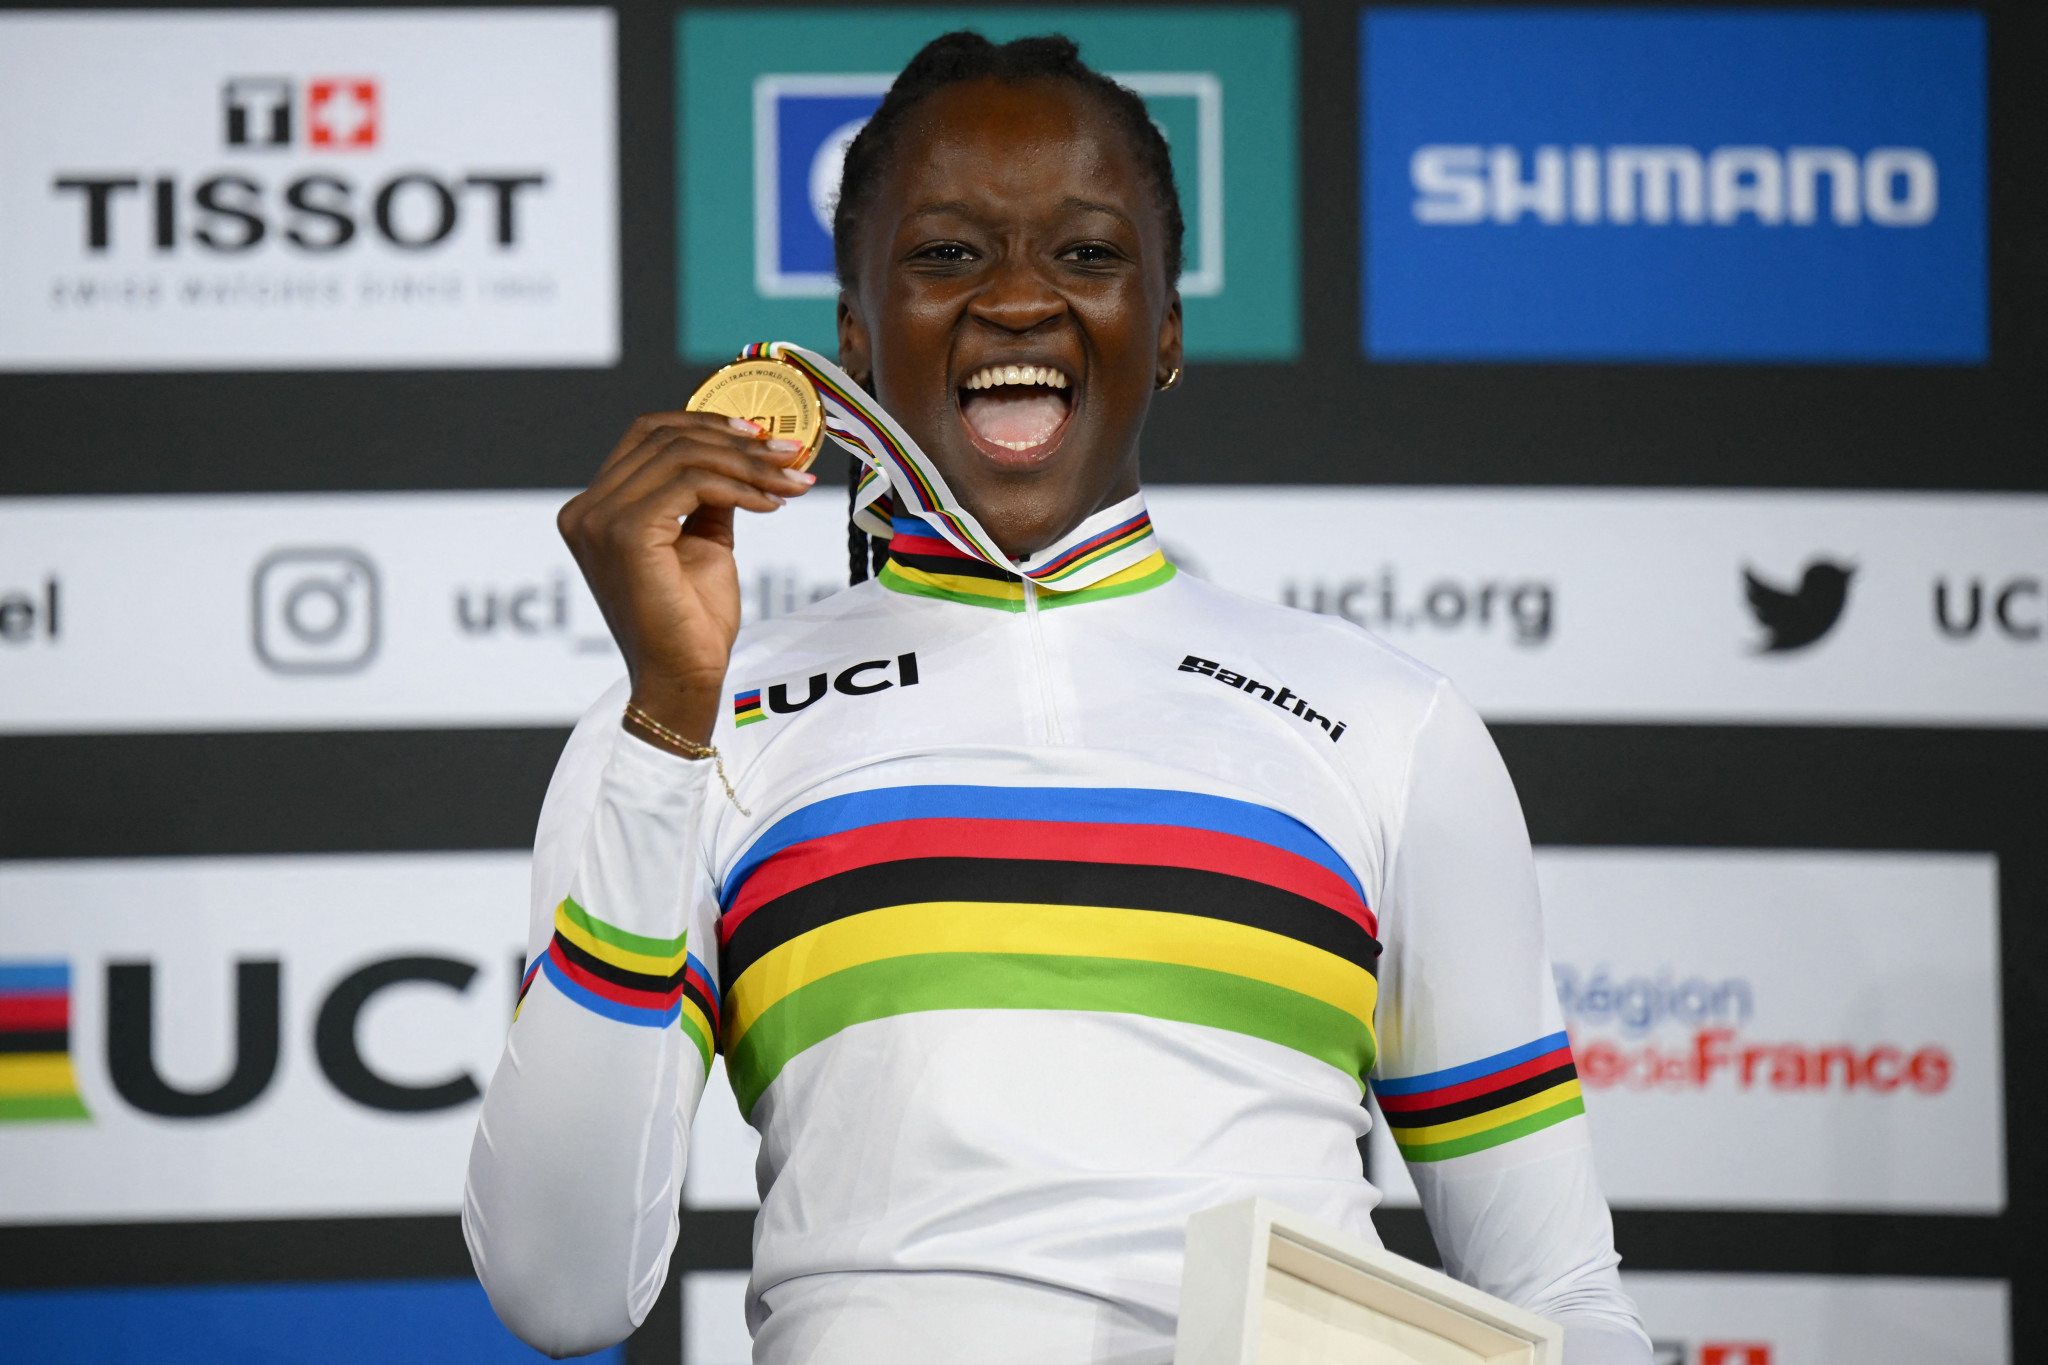 Kouamé gives France home success at Track Cycling World Championships in time trial